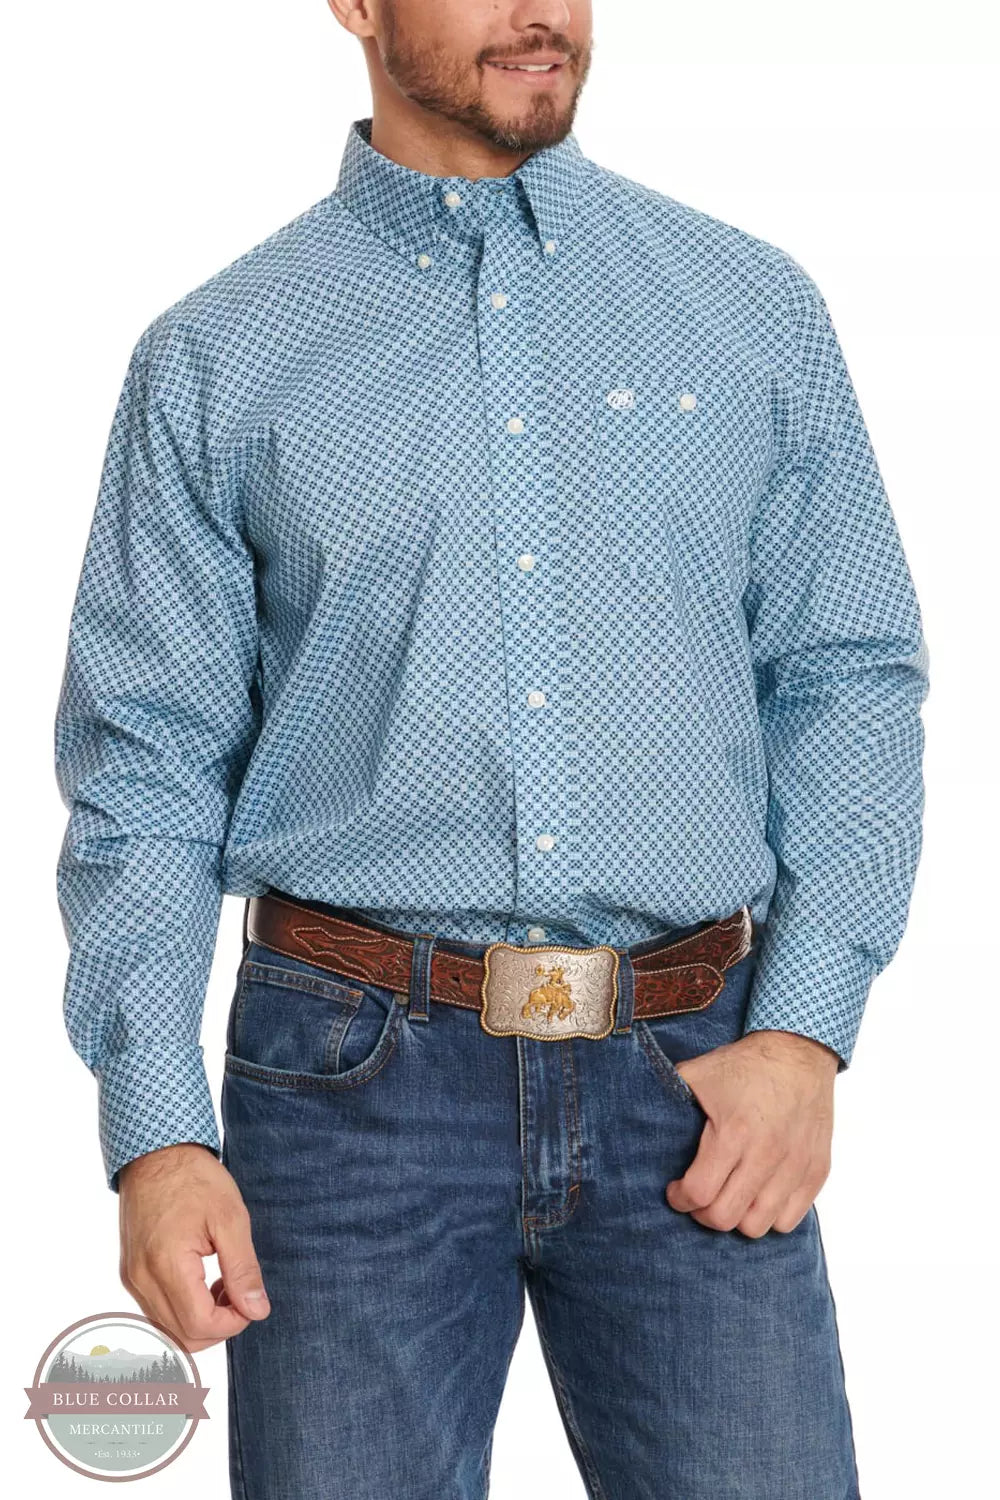 Wrangler 112344263 Easy Care Classic Fit Long Sleeve Button Down Shirt in Carolina Blue & White Geo Print Front View